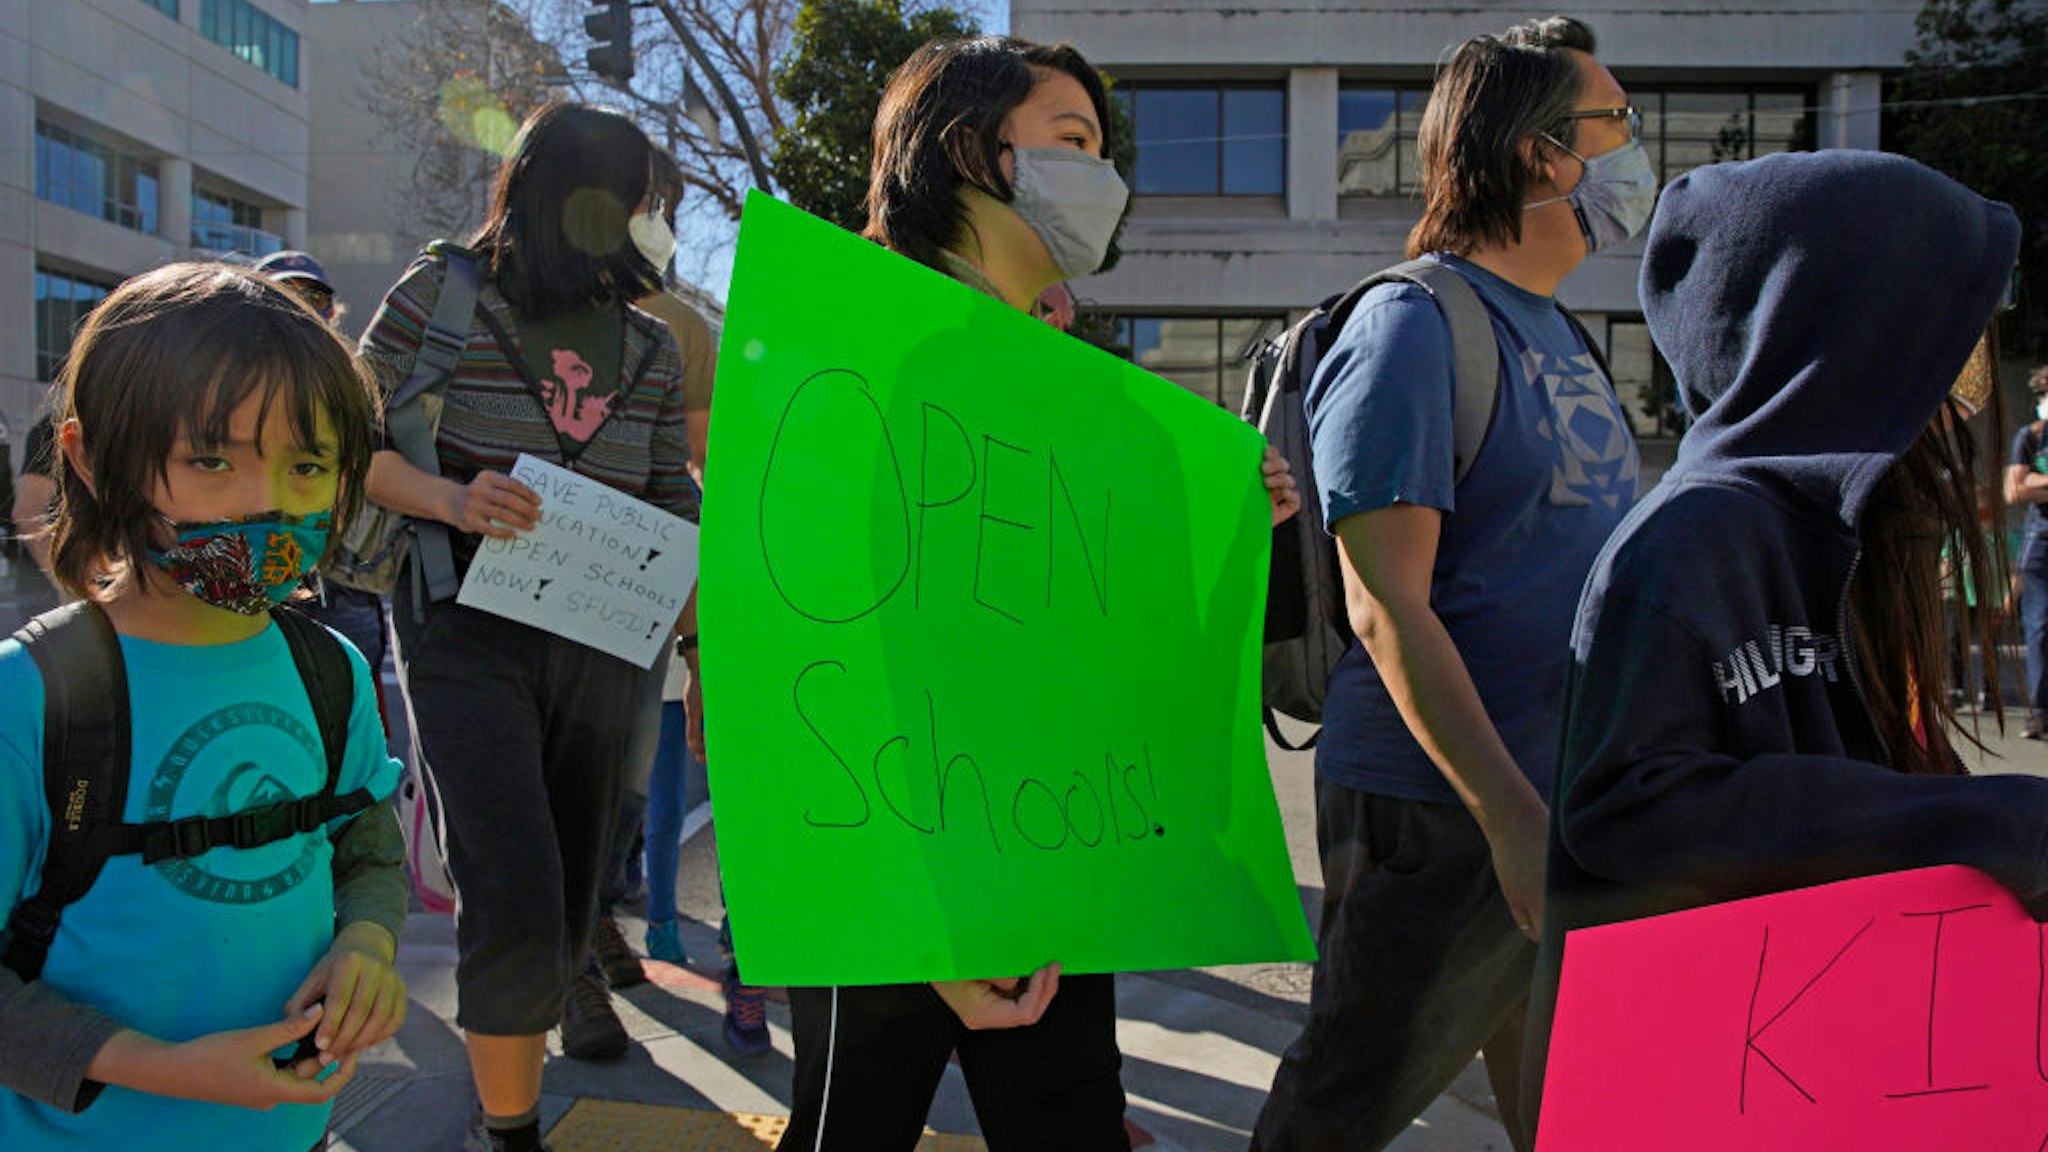 Calder Law, 12, who attends Roosevelt Middle School, marches back to City Hall after a rally outside the SFUSD building, Saturday, Feb. 6, 2021, in San Francisco, Calif.